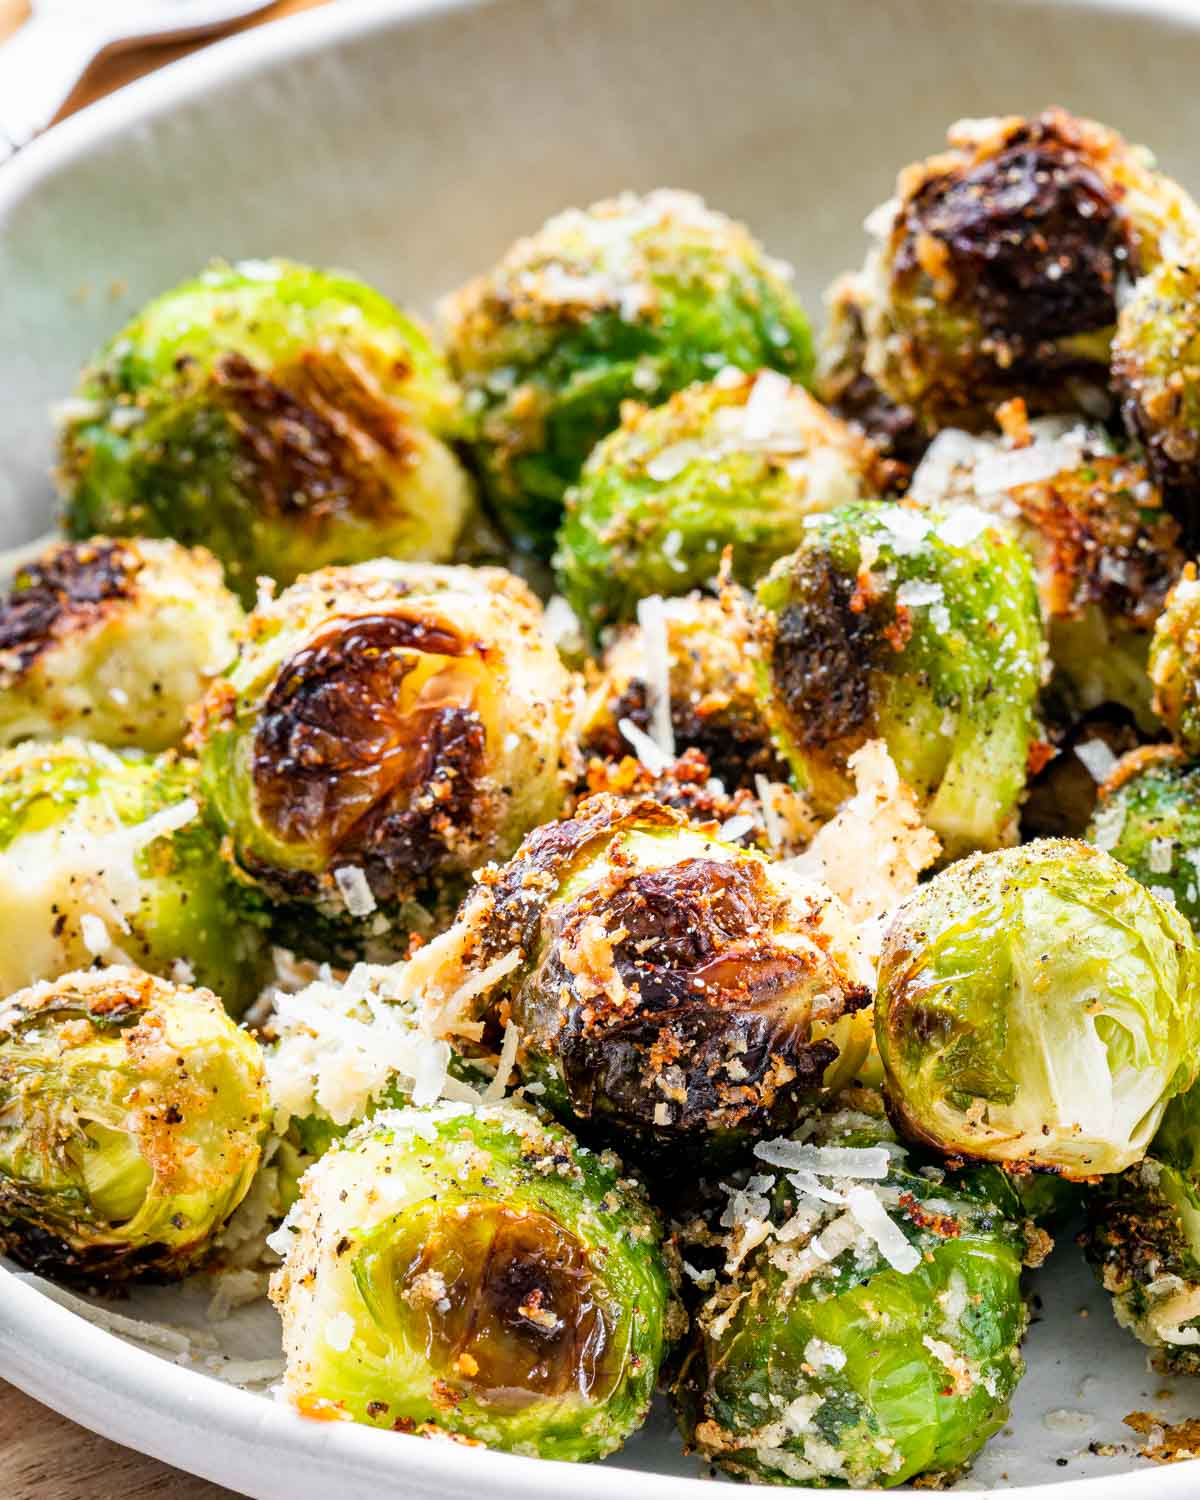 closeup of roasted brussels sprouts in a whit bowl next to a block of parmesan cheese.